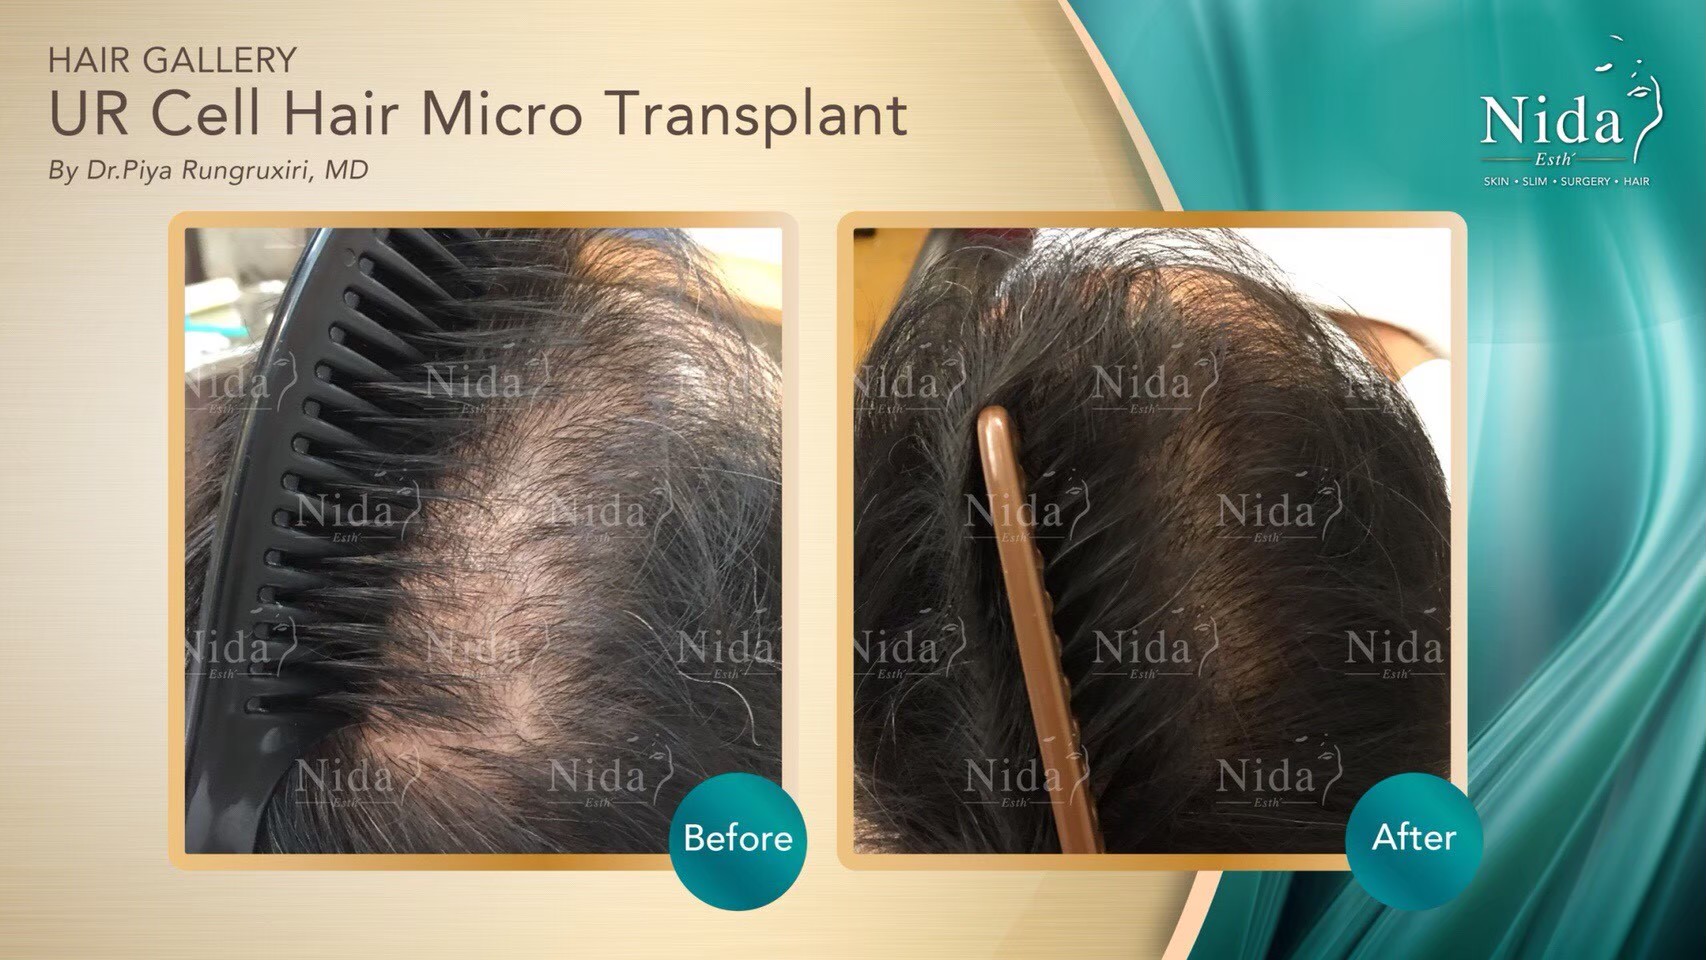 Before - After Ur cell Hair Micro Transplant